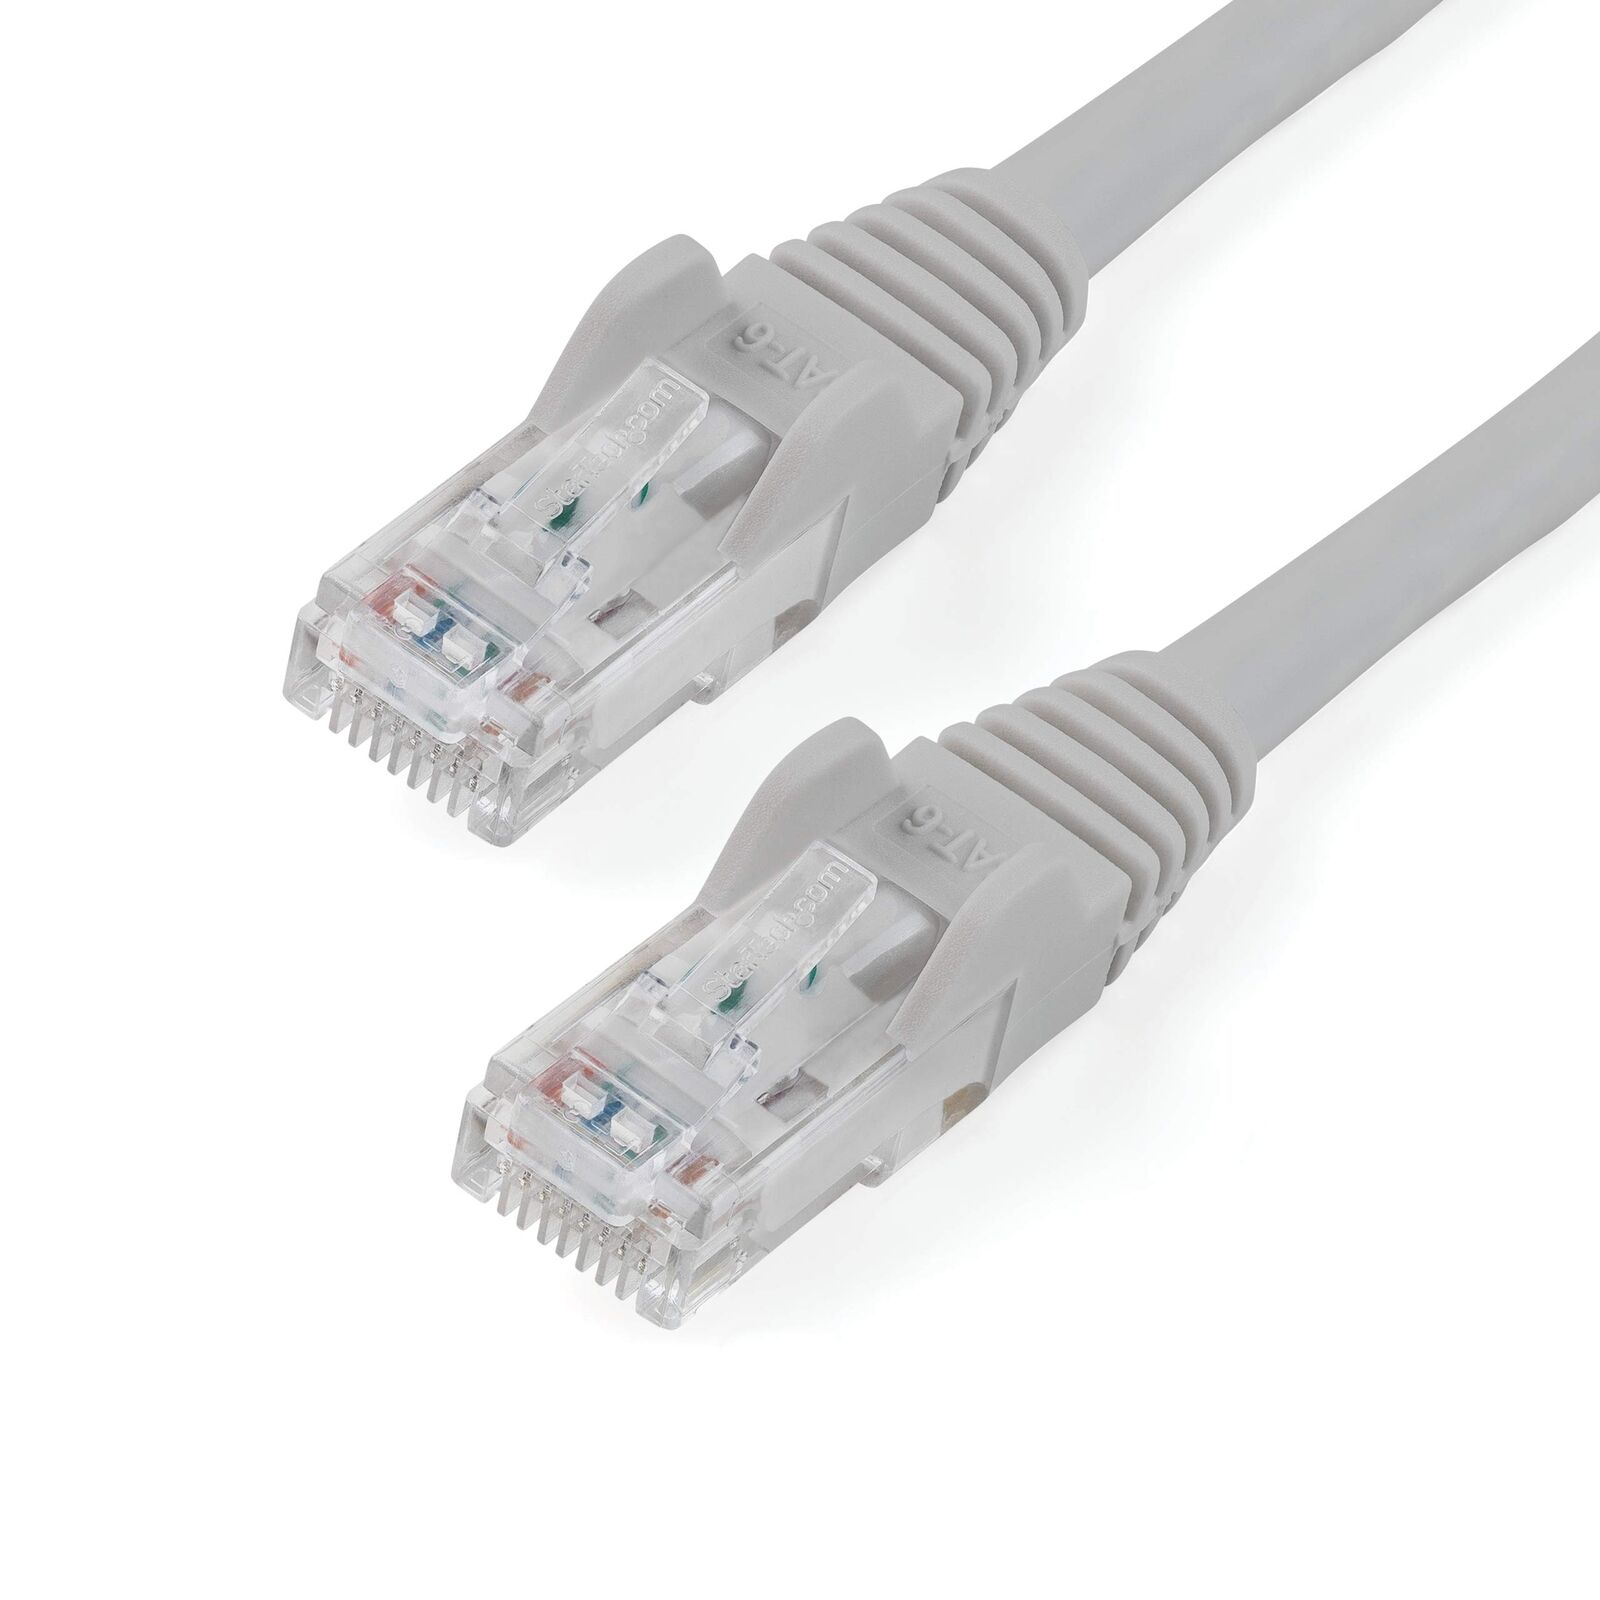 StarTech.com 6in CAT6 Ethernet Cable - Gray CAT 6 Gigabit Ethernet Wire -650M...